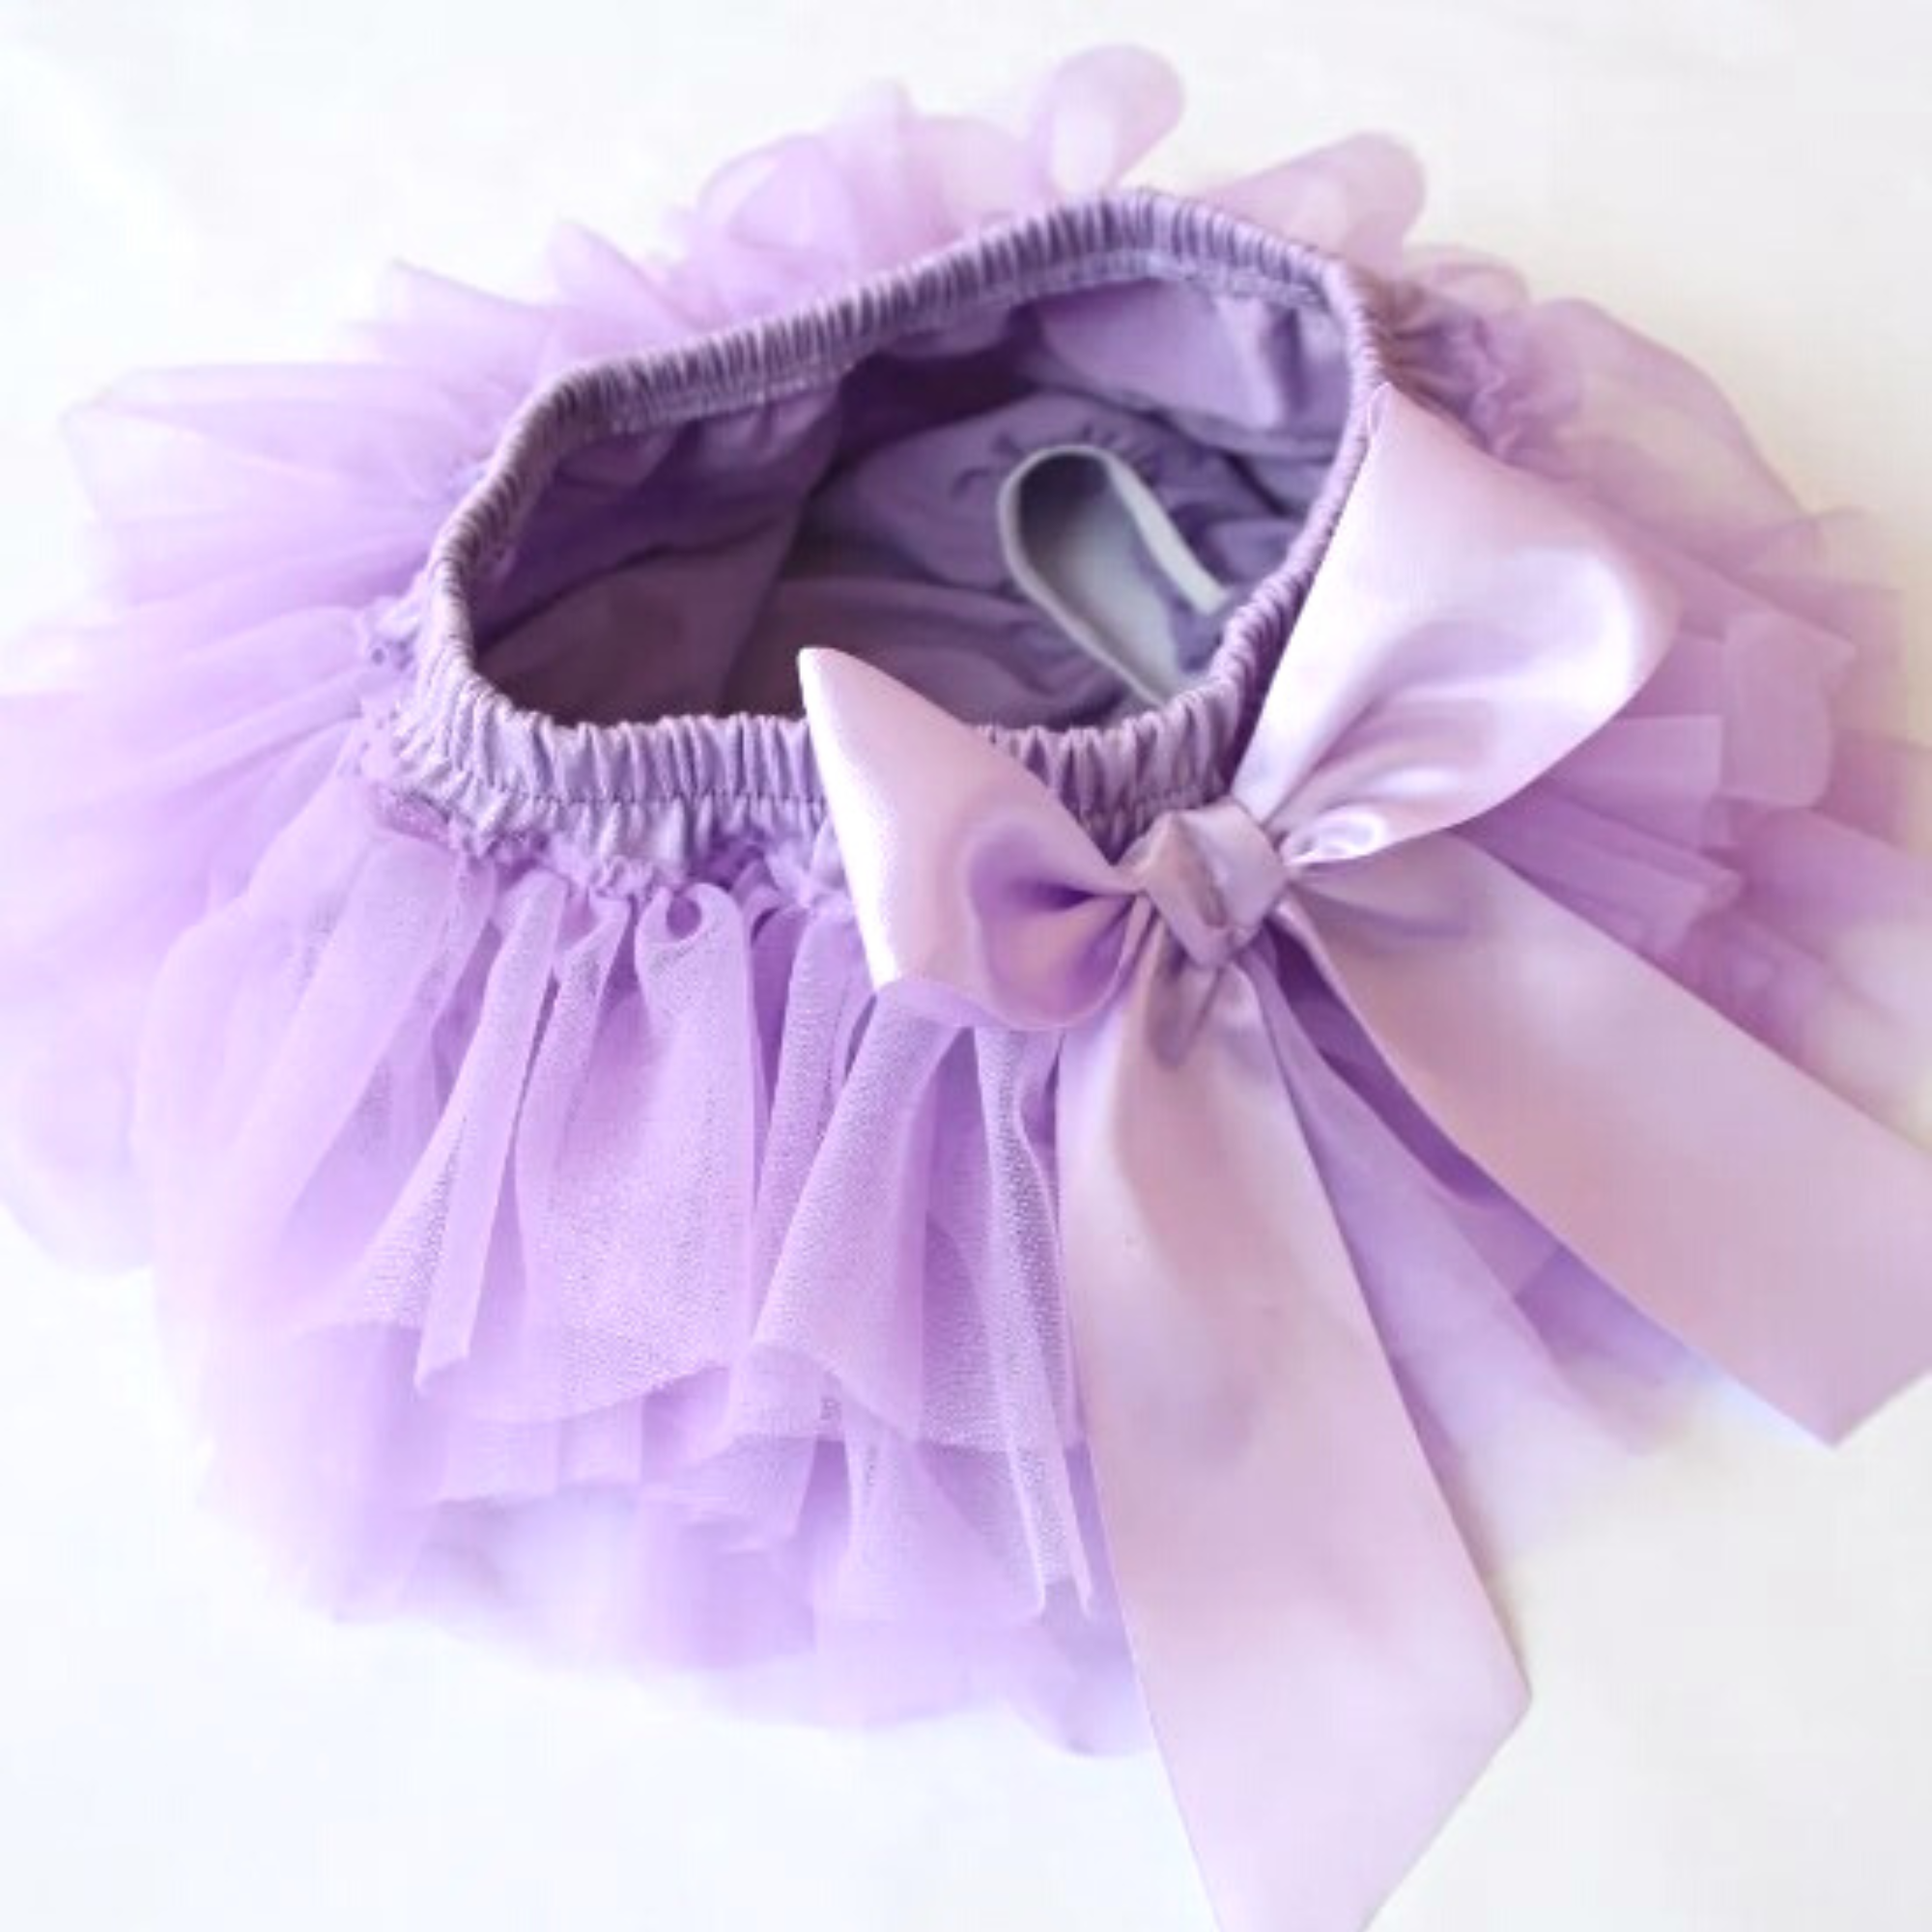 Baby ruffle bum tutu nappy covers with matching headband VARIOUS COLOURS